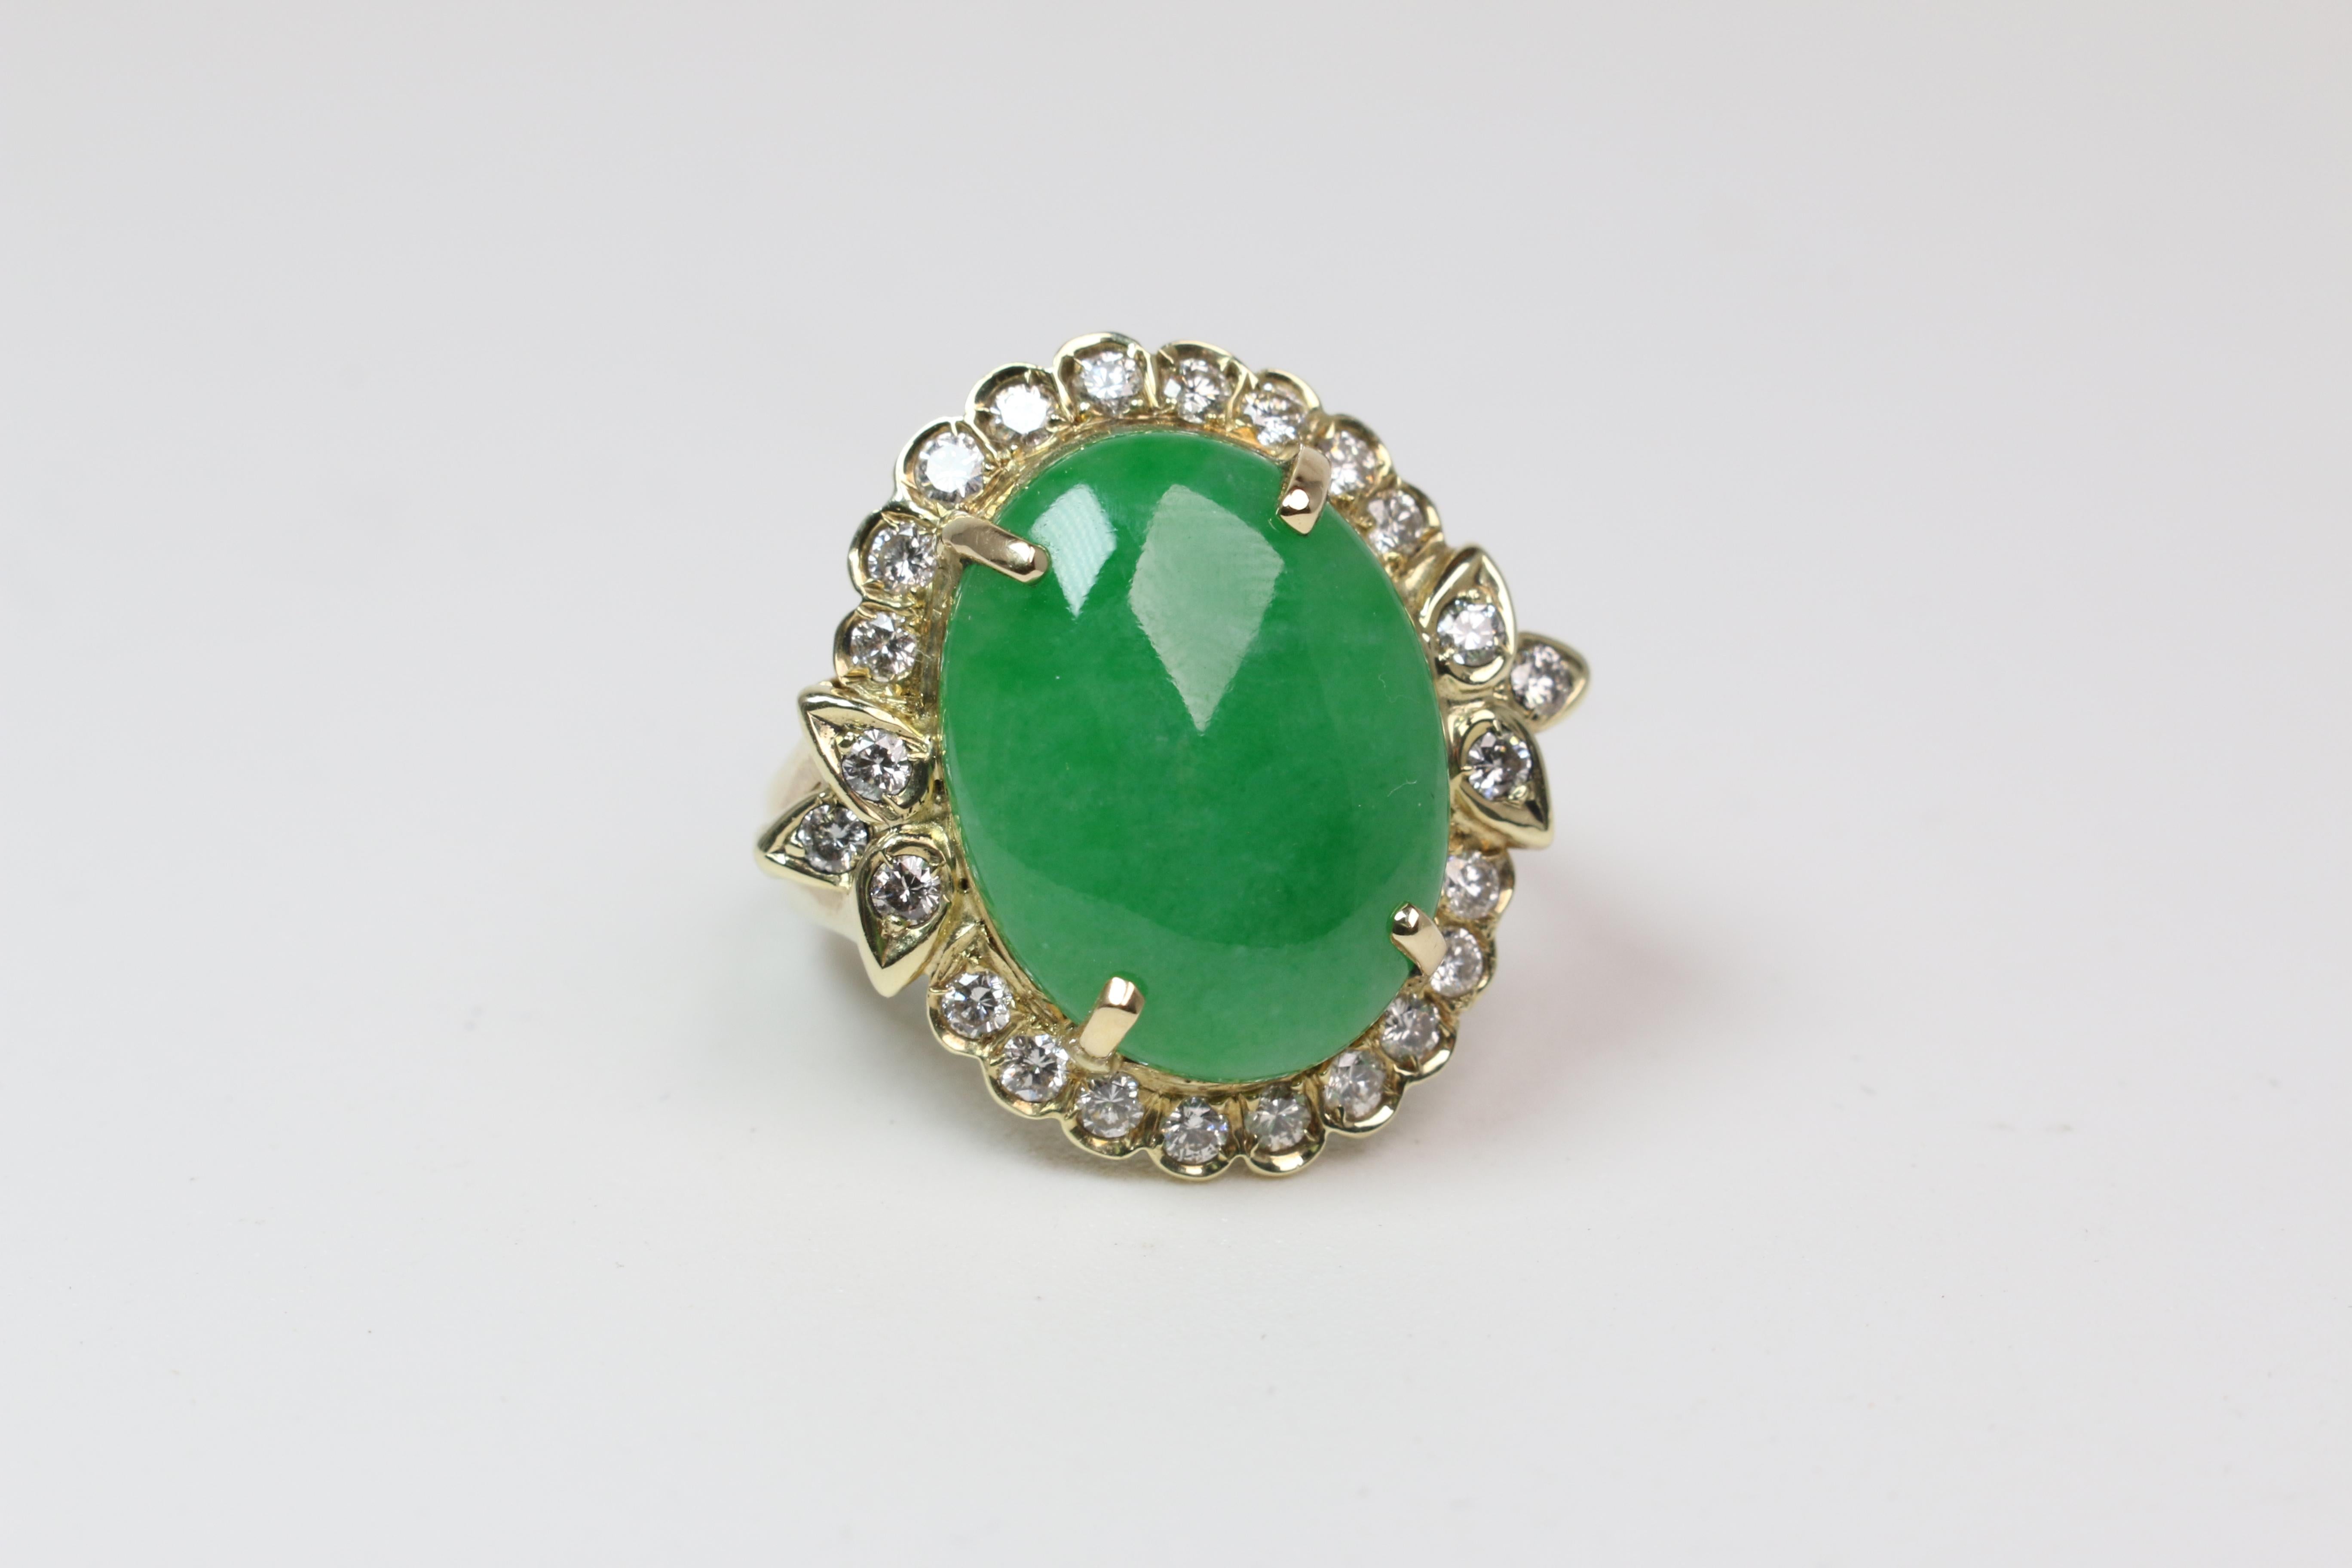 This stunning 13mm x 17mm oval cut jade is set in 14k Yellow Gold with a Diamond Halo. The ring is sized to a 6.5 and can be sized before shipping if needed.